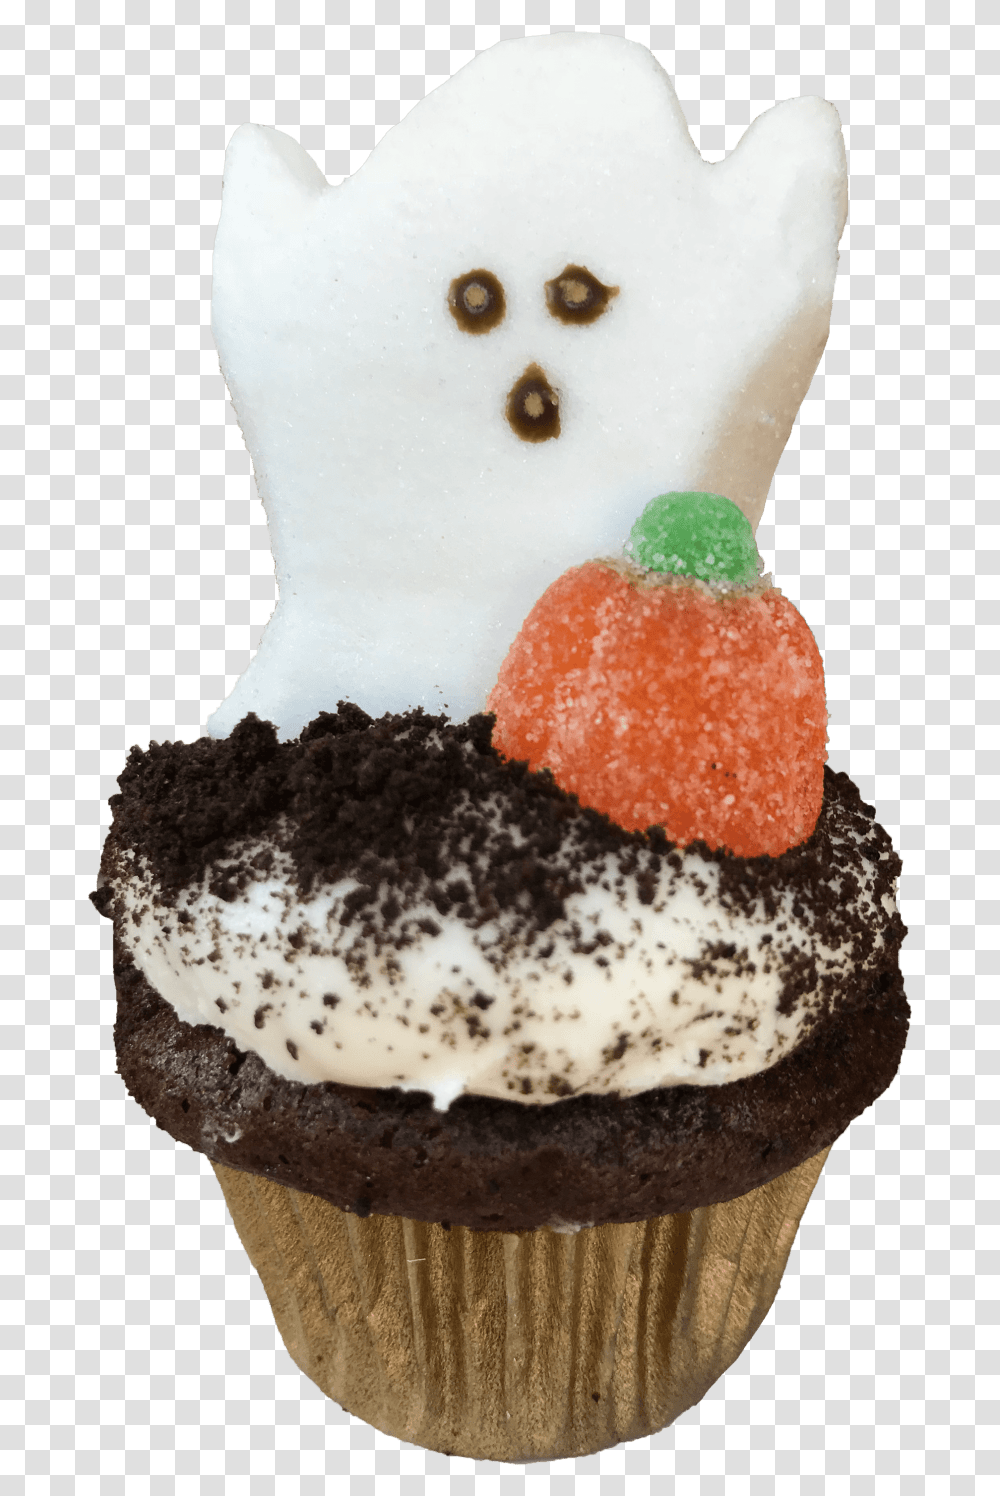 Download Cupcake Halloween Cupcakes Baking Cup, Sweets, Food, Confectionery, Outdoors Transparent Png